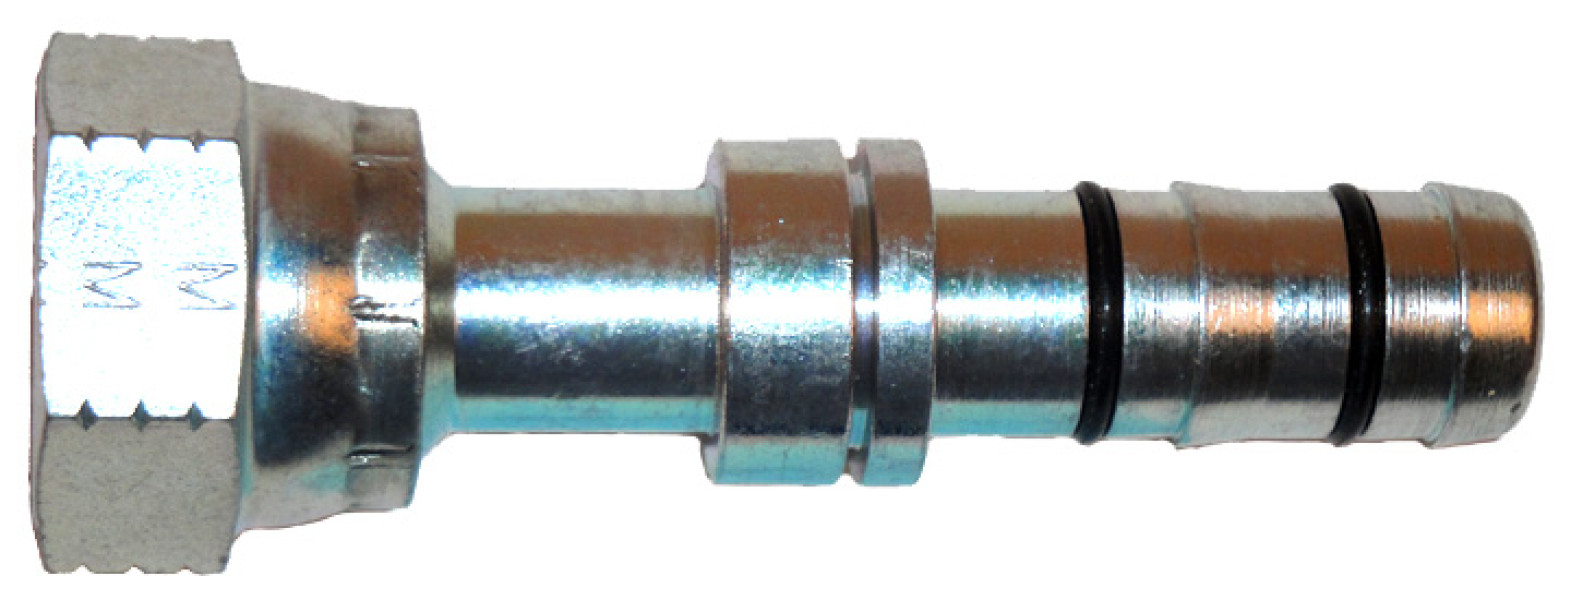 Image of A/C Refrigerant Hose Fitting from Sunair. Part number: GA23911-10-12